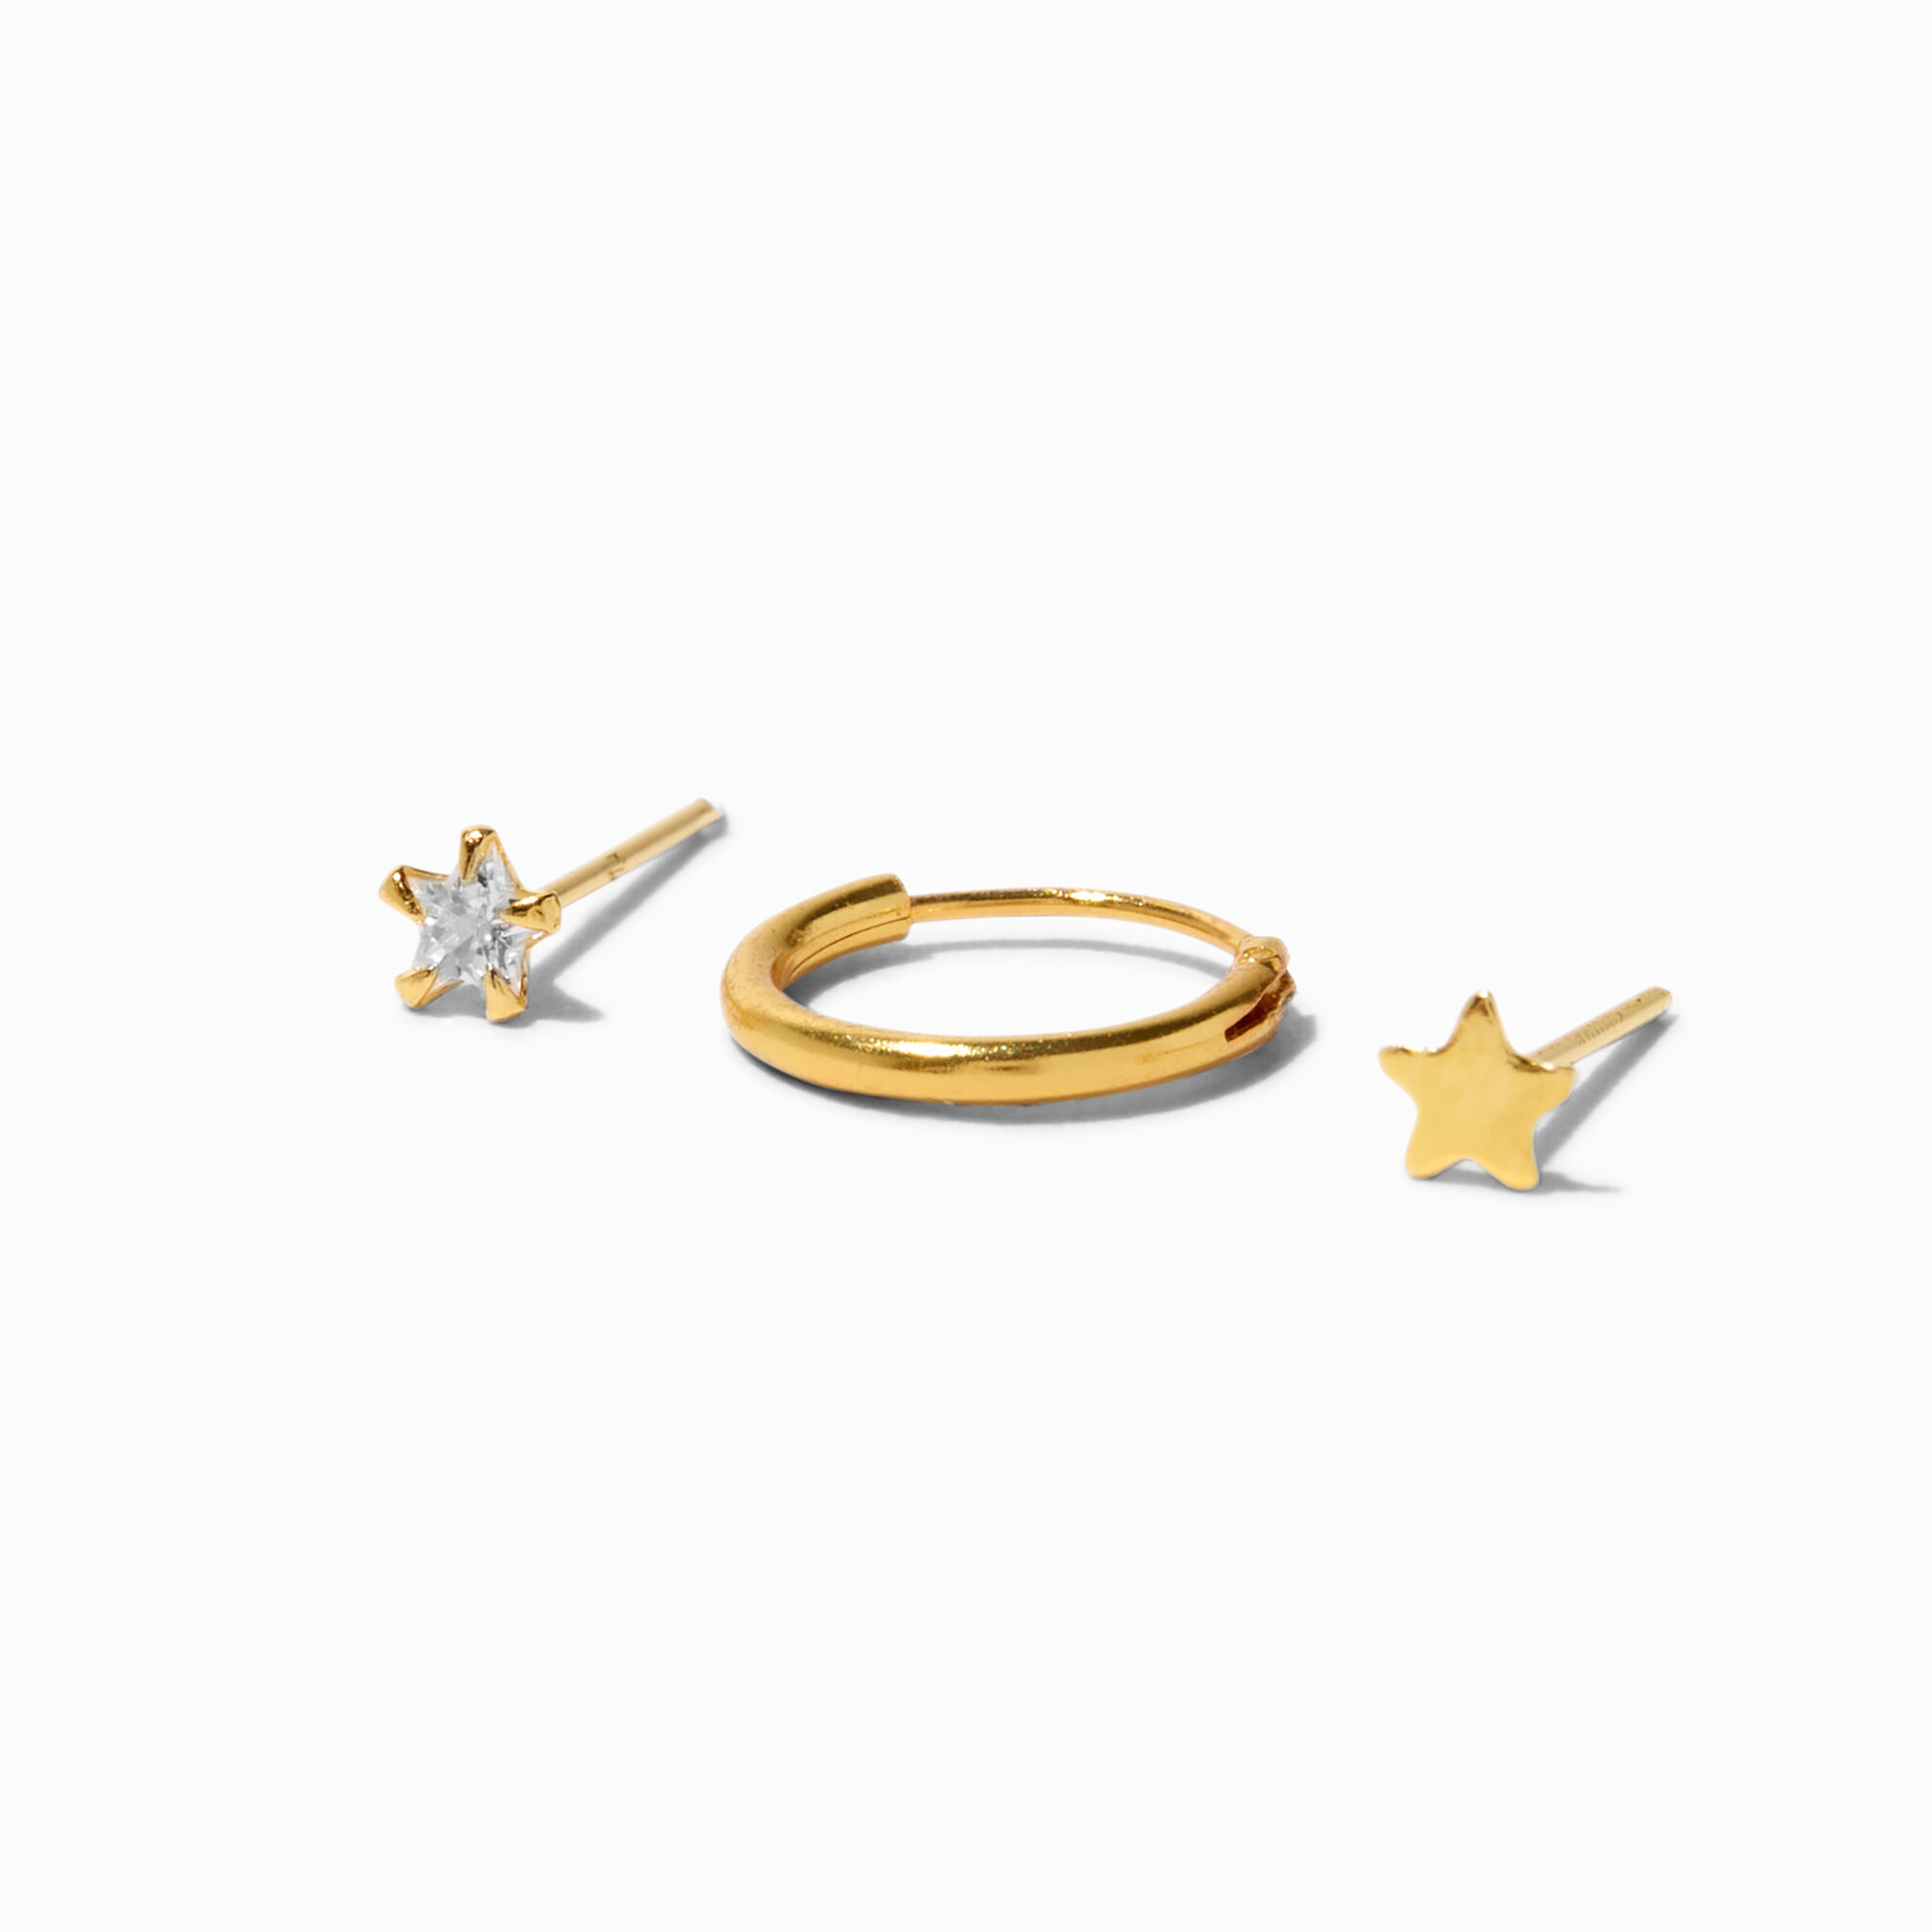 View Claires GoldTone Cubic Zirconia 22G Star Stud Hoop Nose Rings 3 Pack Silver information